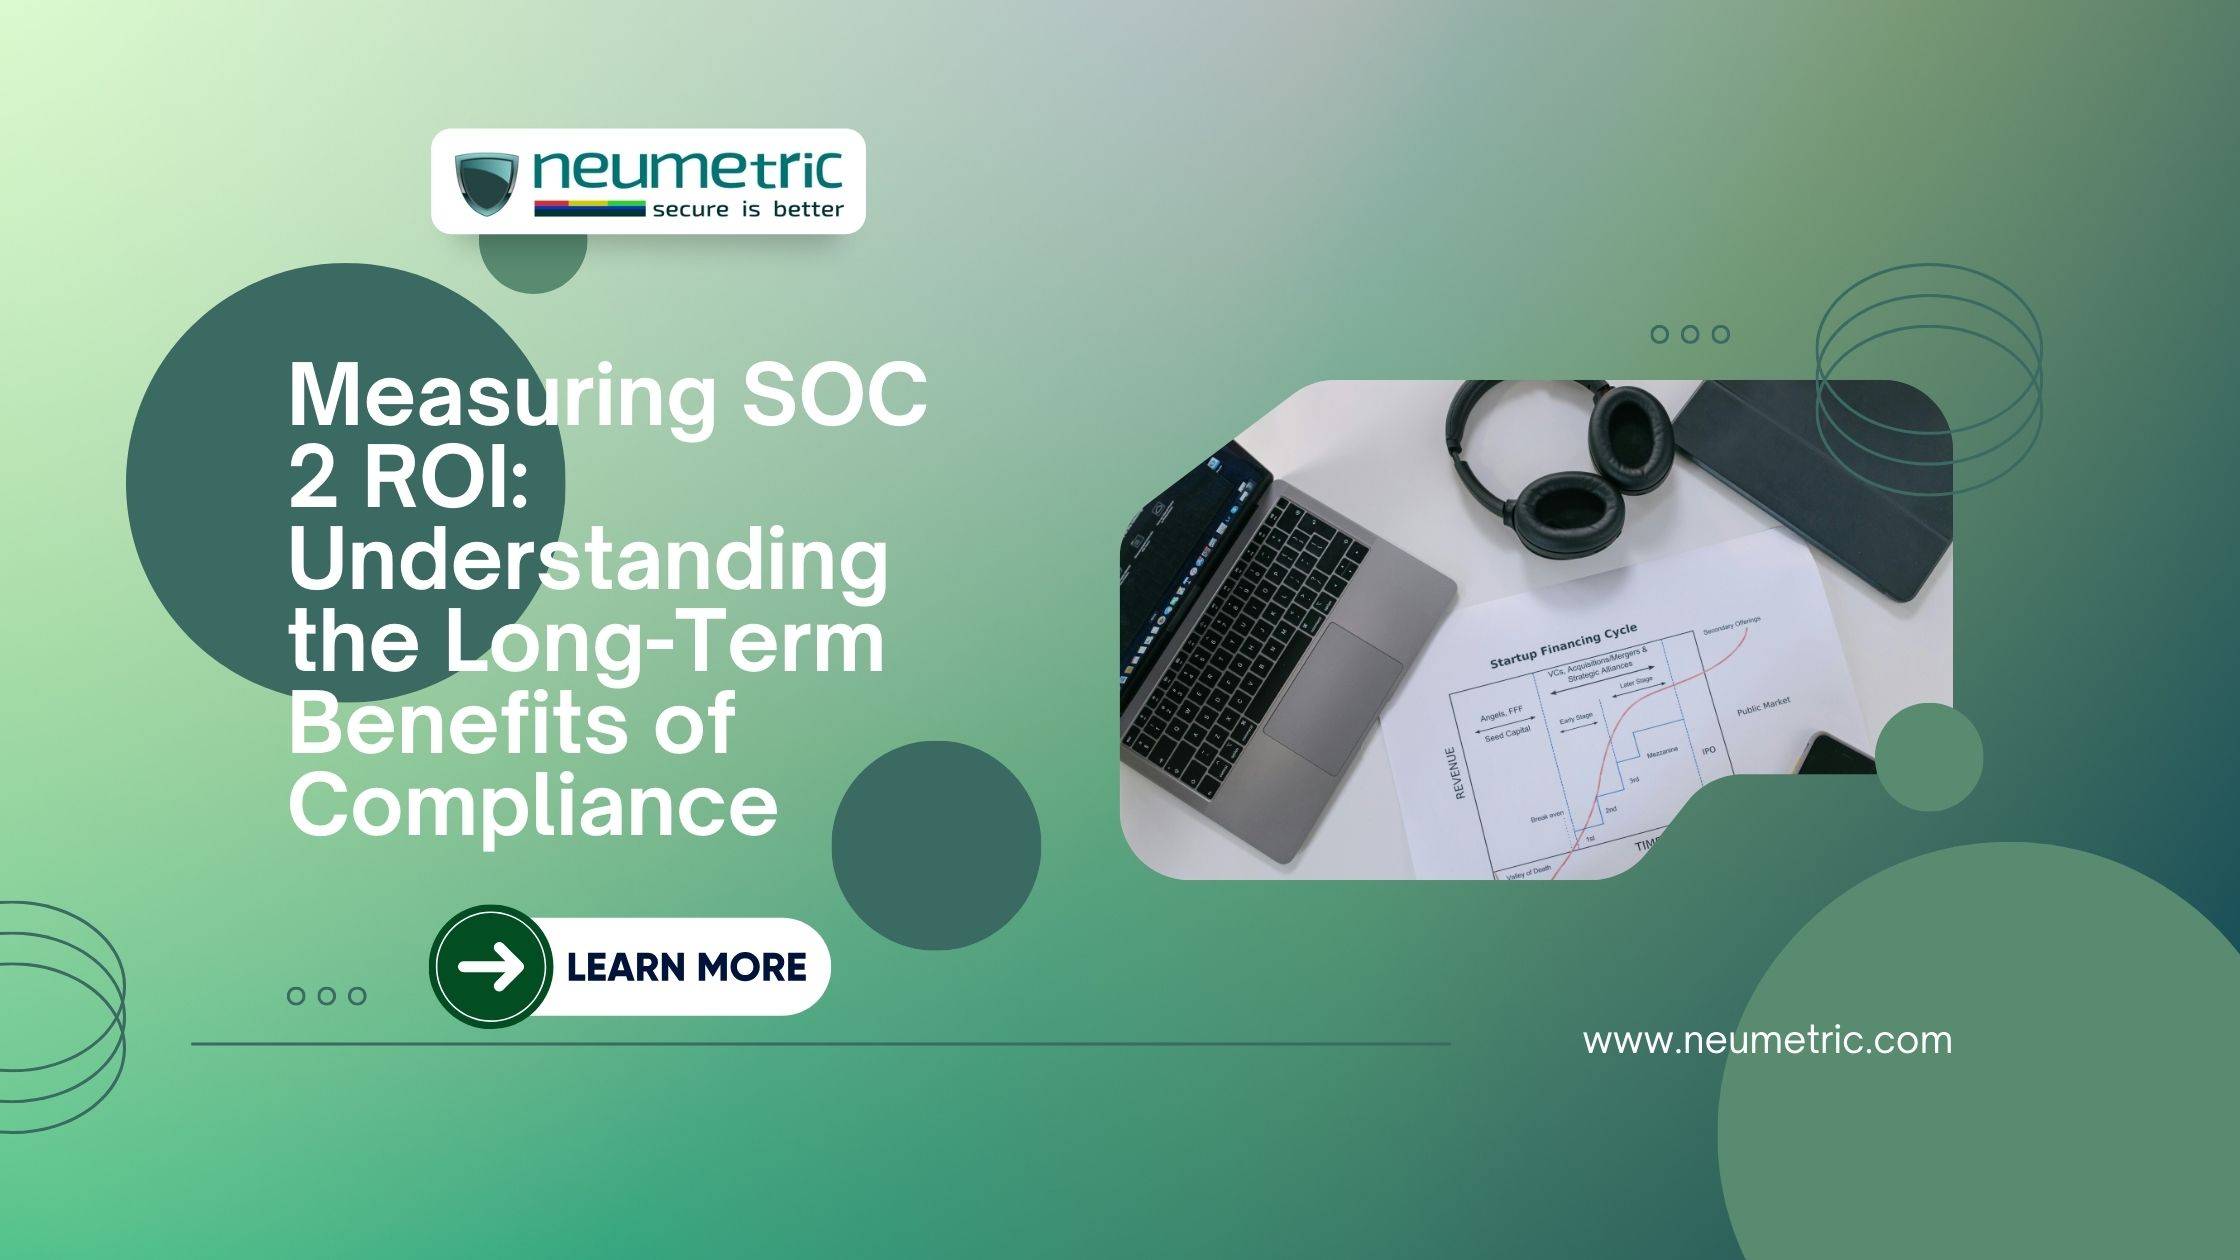 Measuring SOC 2 ROI: Understanding the Long-Term Benefits of Compliance